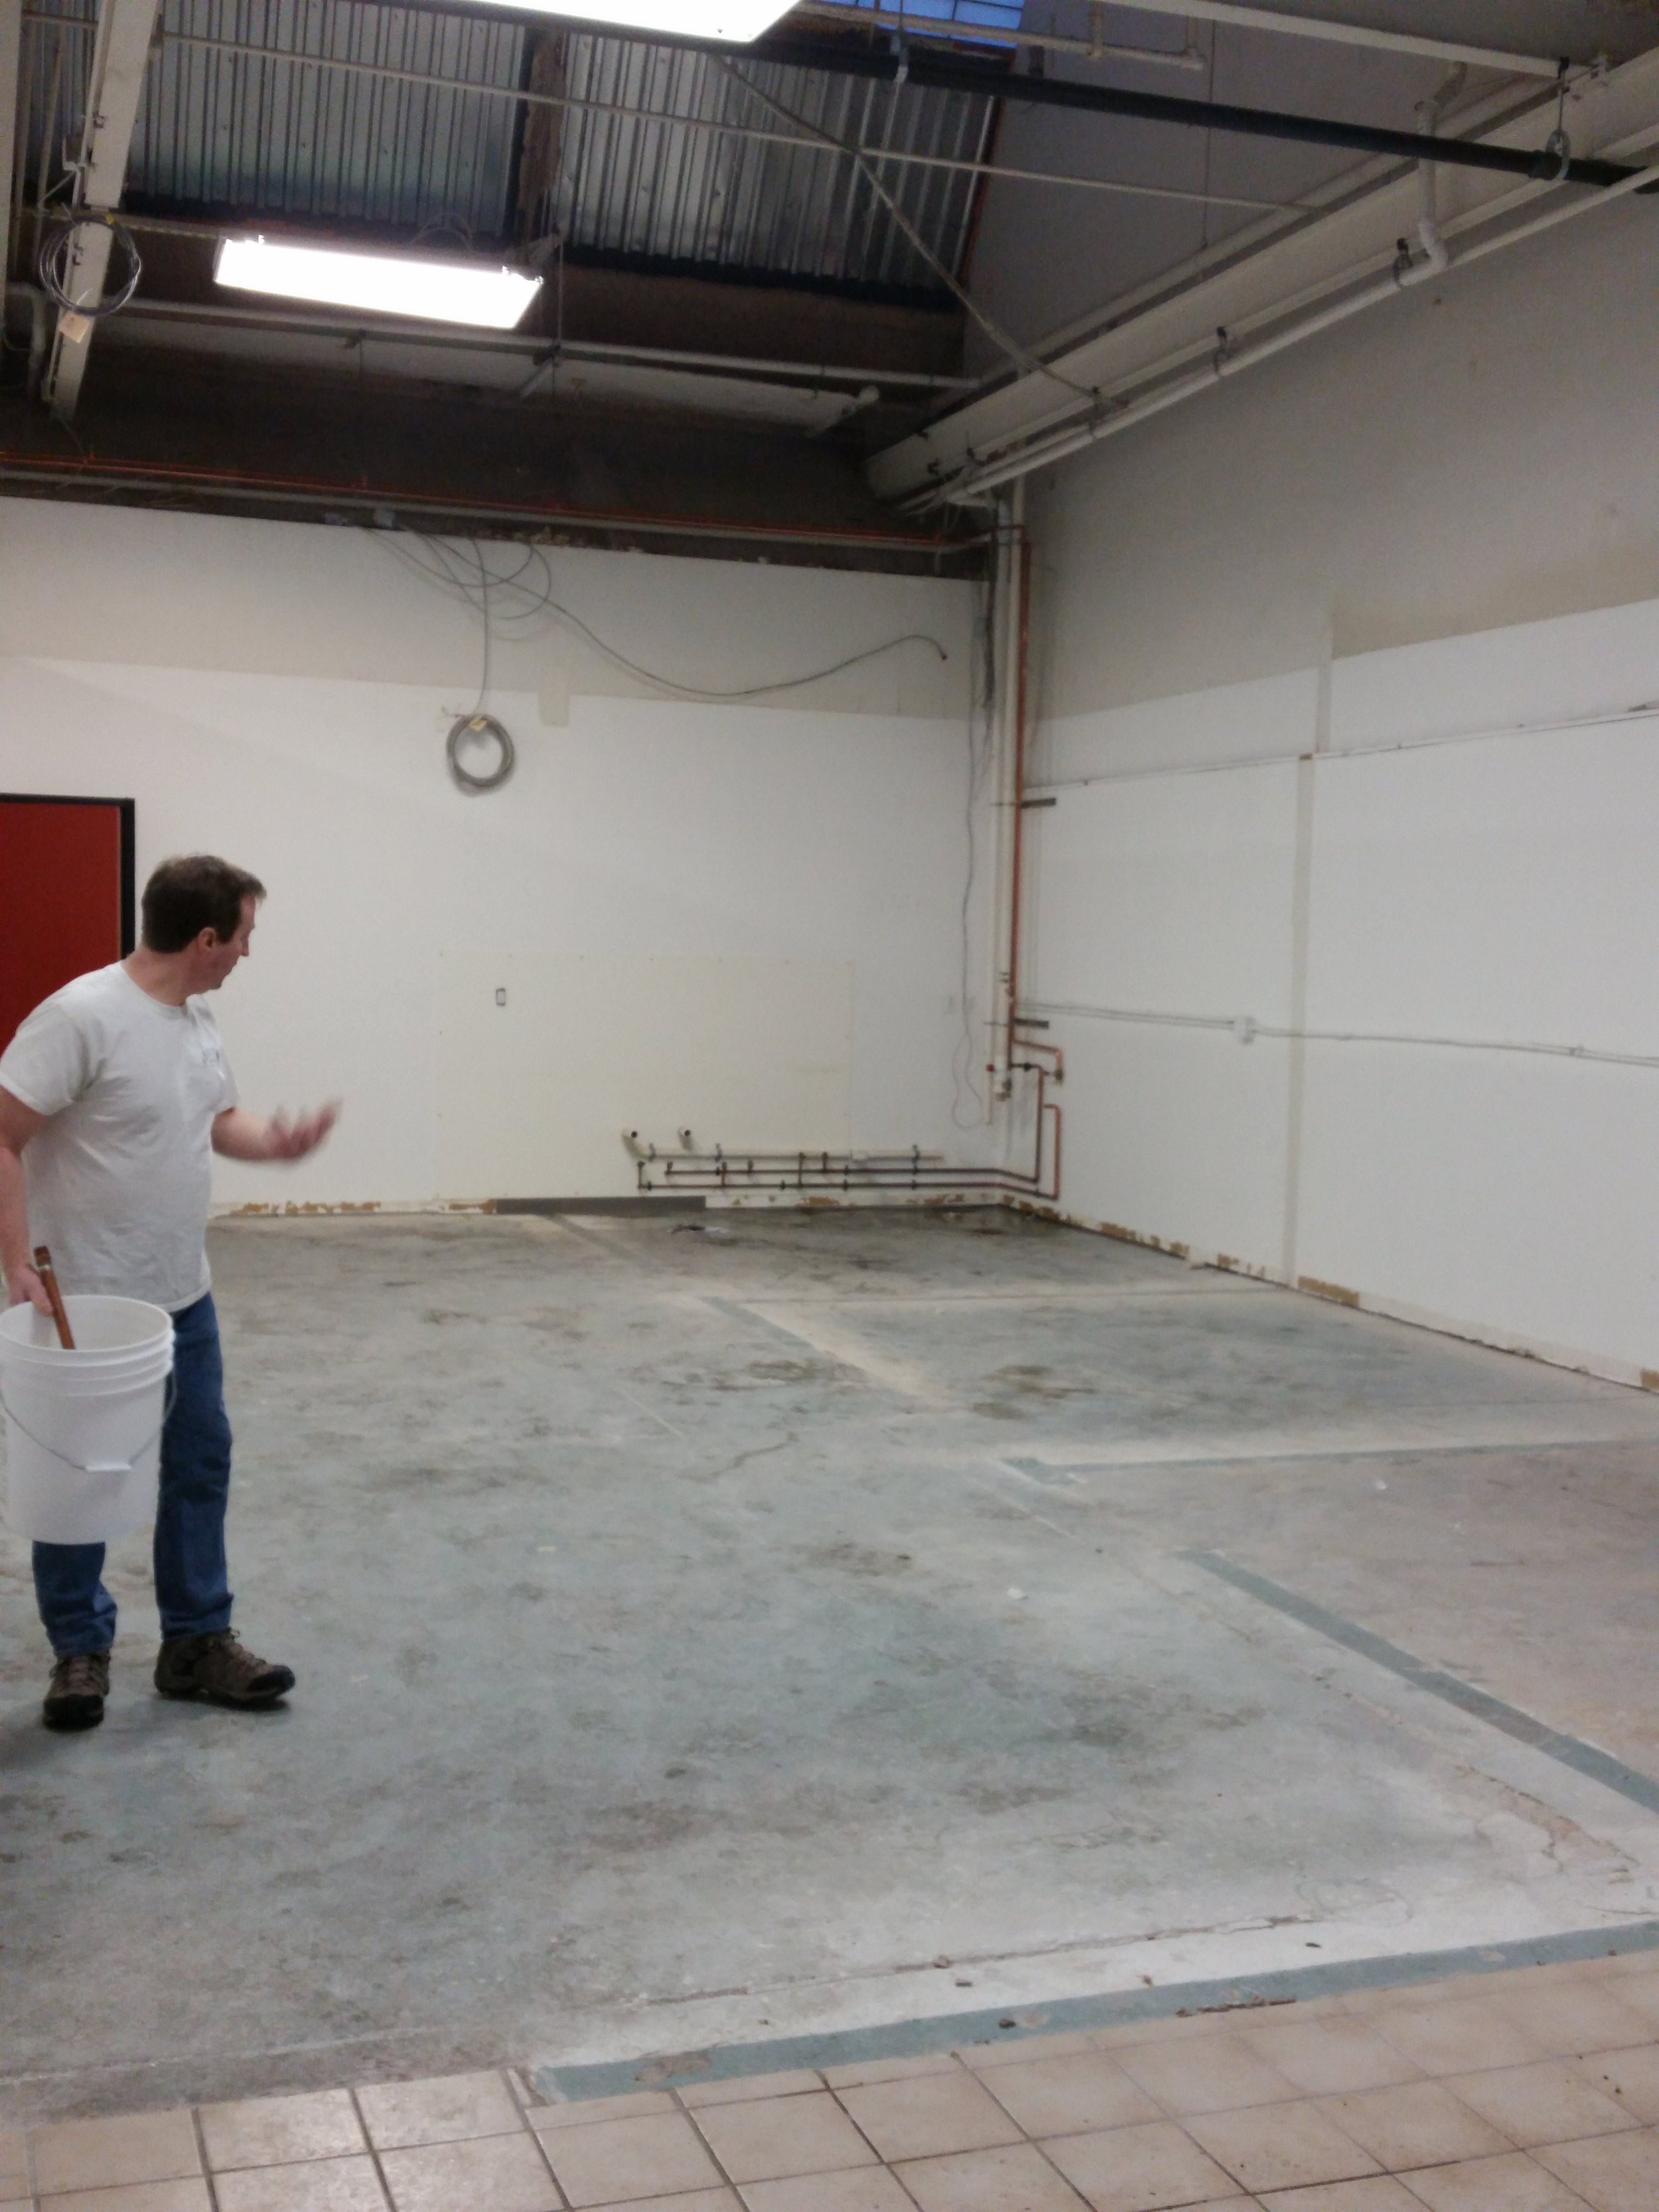 Mike looking around and surprised at how big 870 sqft is.